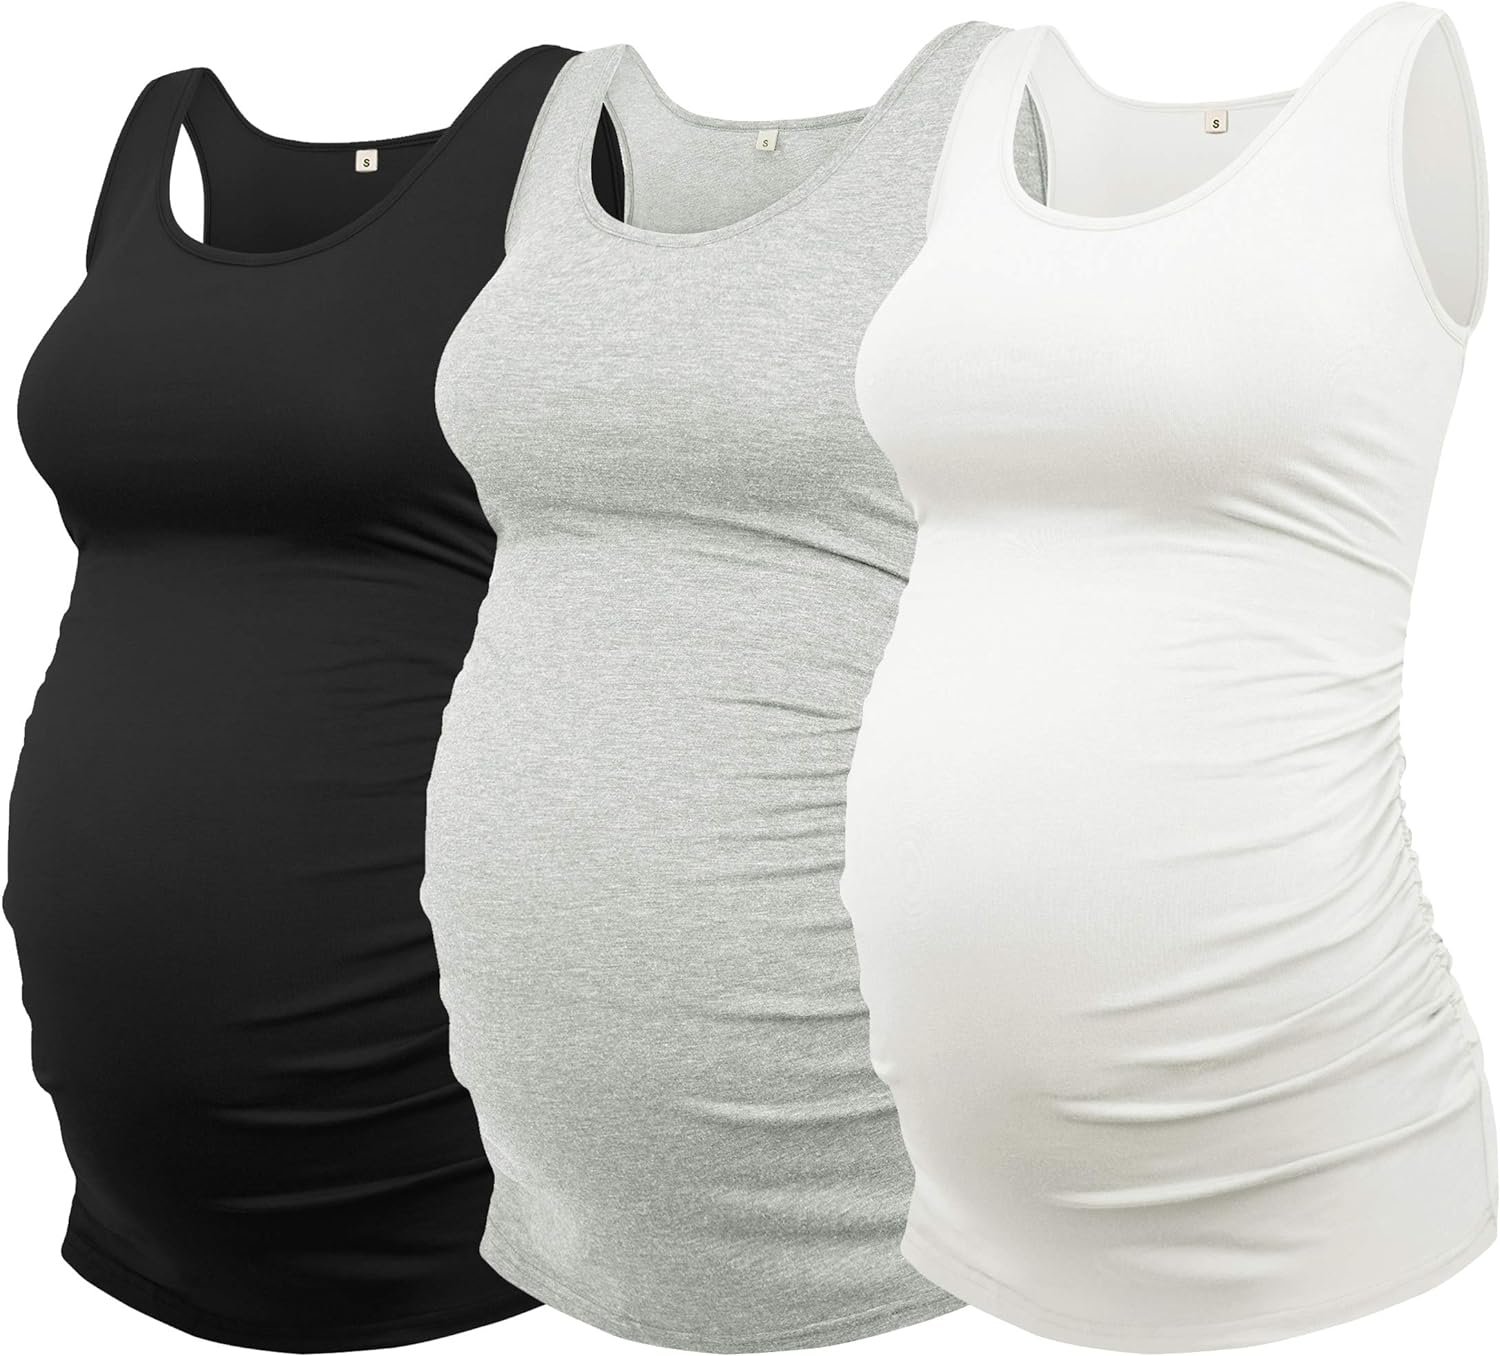 AMPOSH Womens Maternity Tank Top 3 Pack Ruched Side Sleeveless Pregnancy Basic Shirt